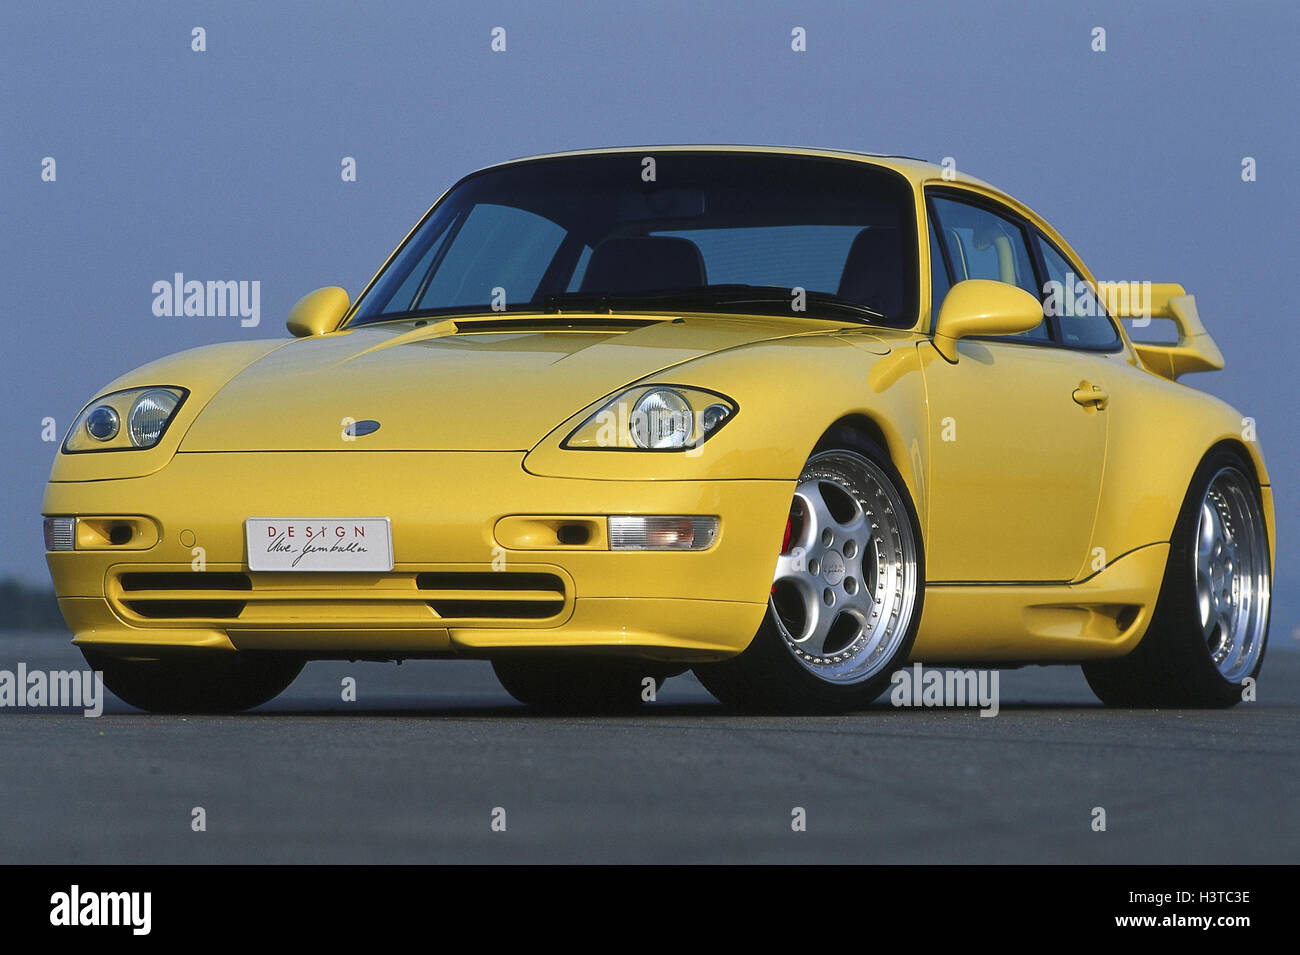 Gemballa, yellow, Porsche, Turbo traffic, car, car, passenger car, means transportation, vehicle, autotype, carriage, new carriage, expensive, exclusiv, quickness, HP, racing car, sports car, sports car Stock Photo